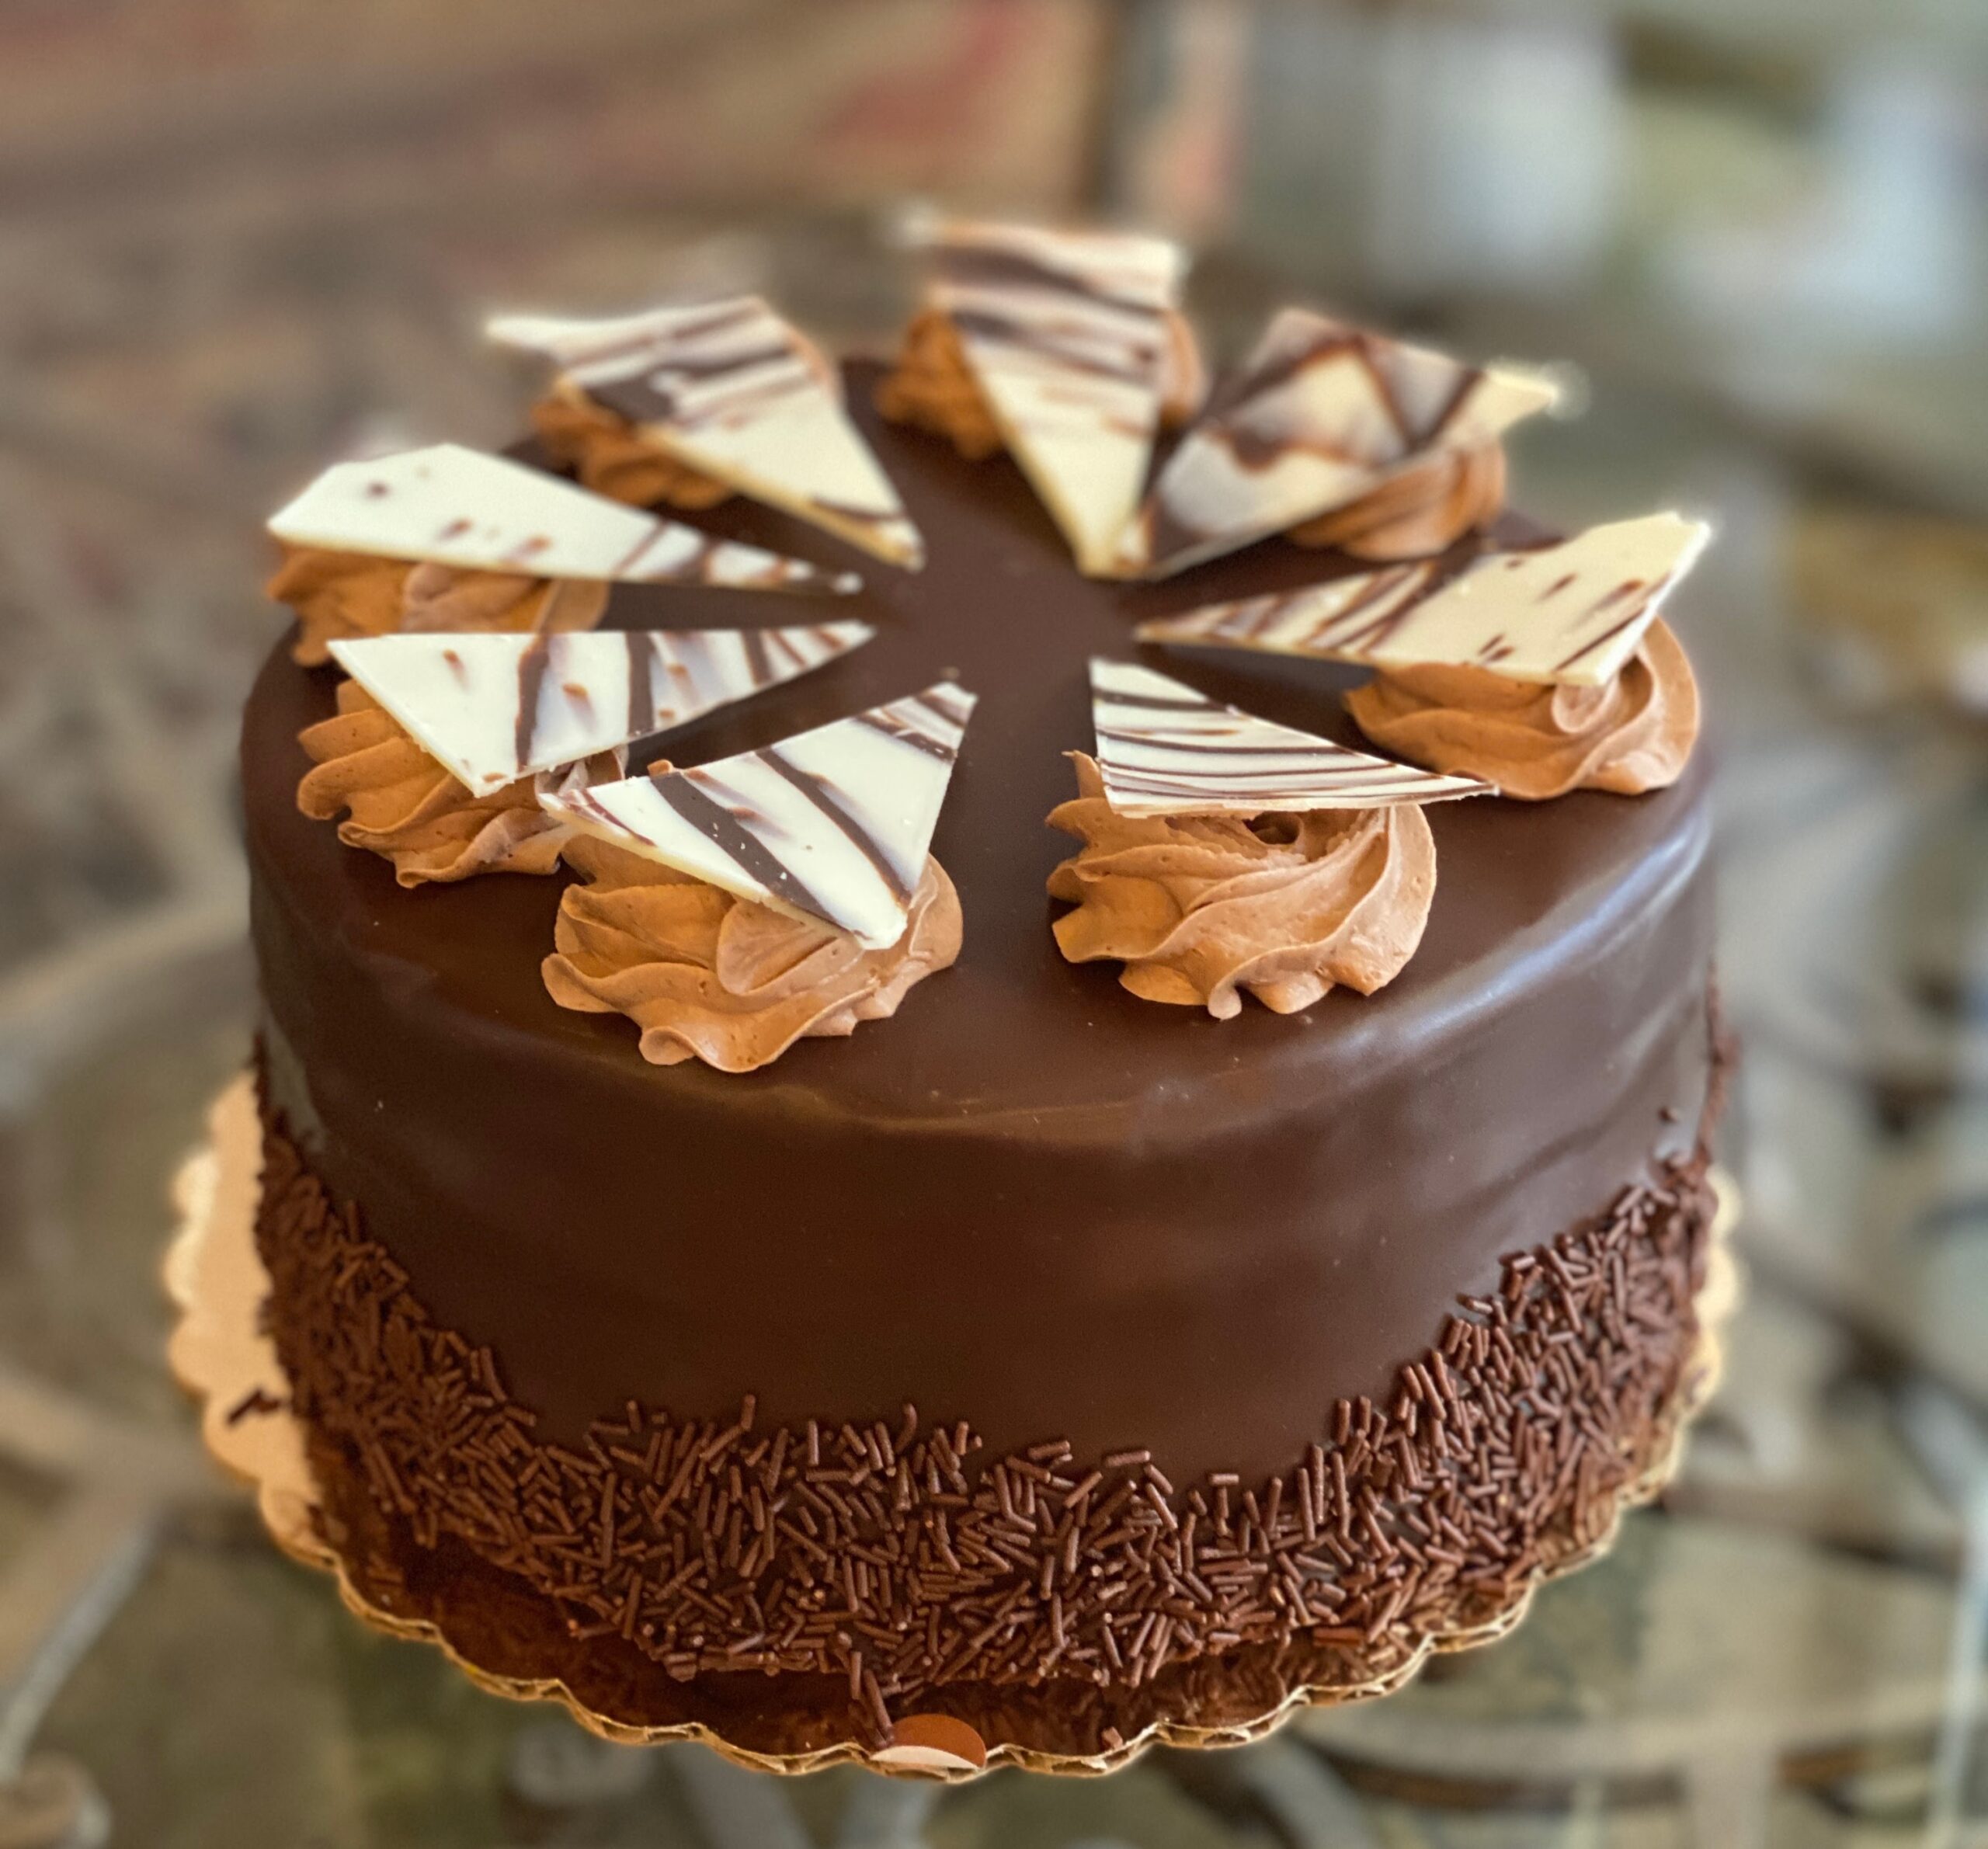 Toblerone With Oreo Biscuit by bakisto - the cake company